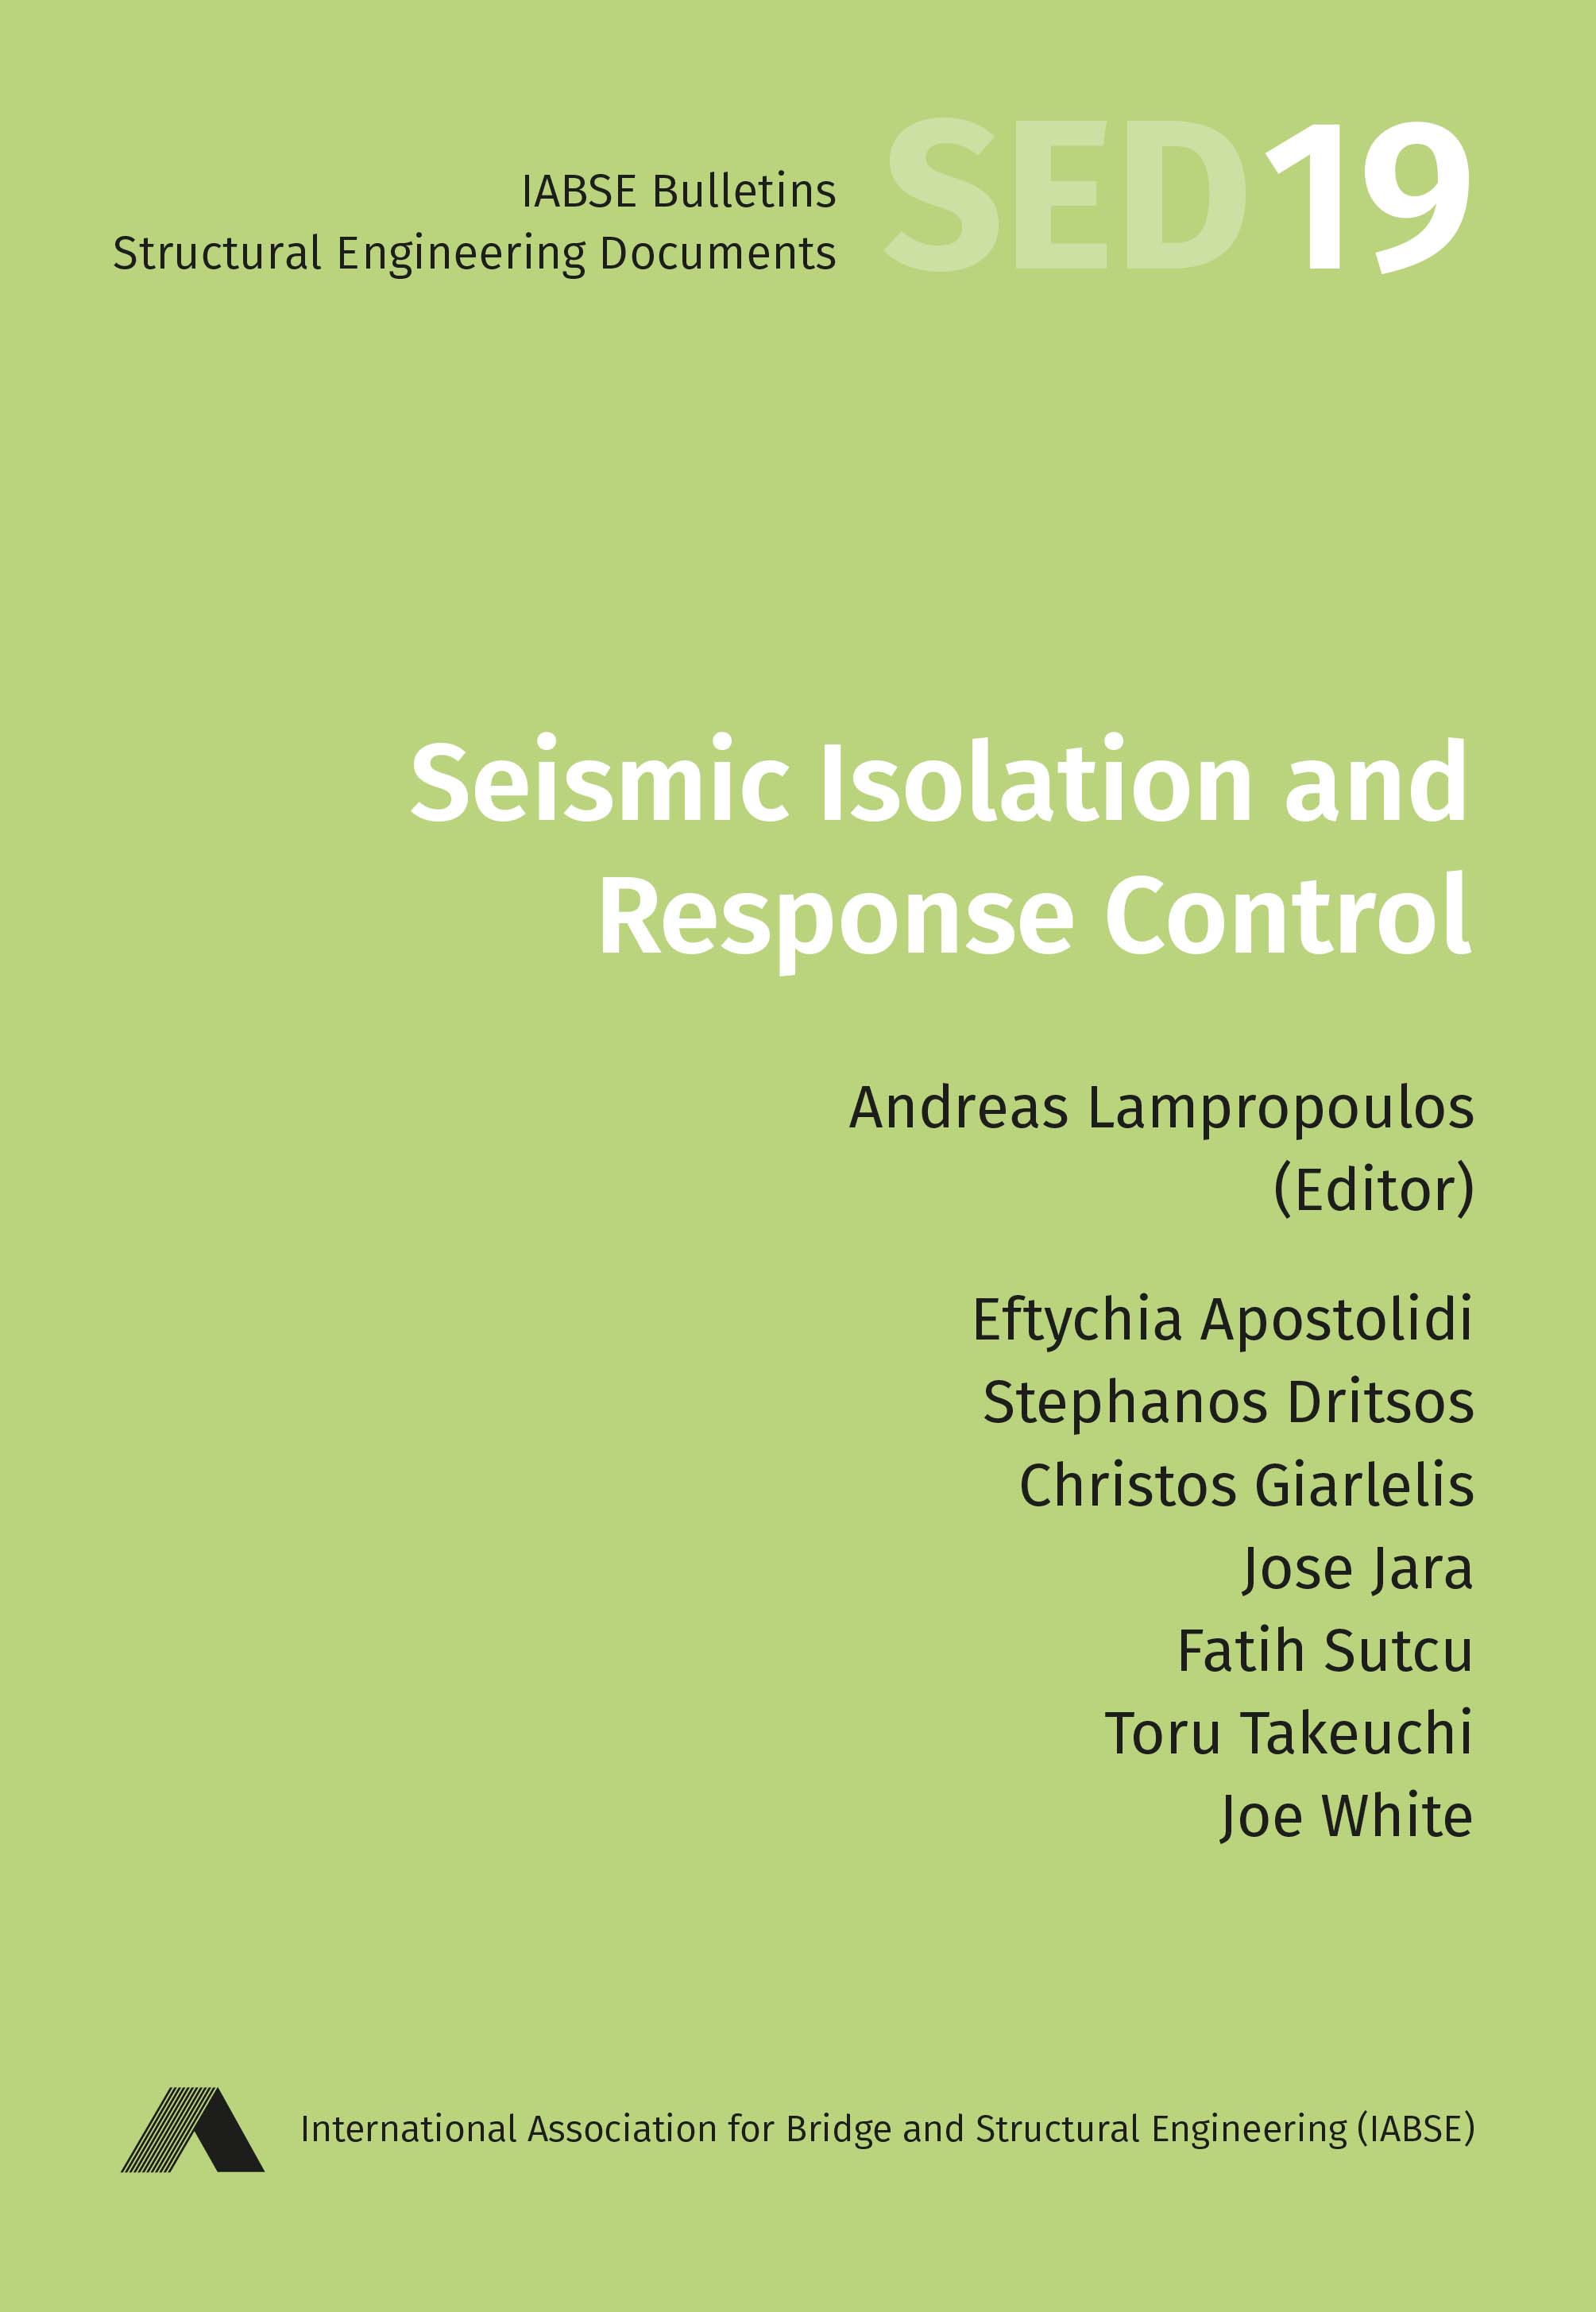  Seismic Isolation and Response Control